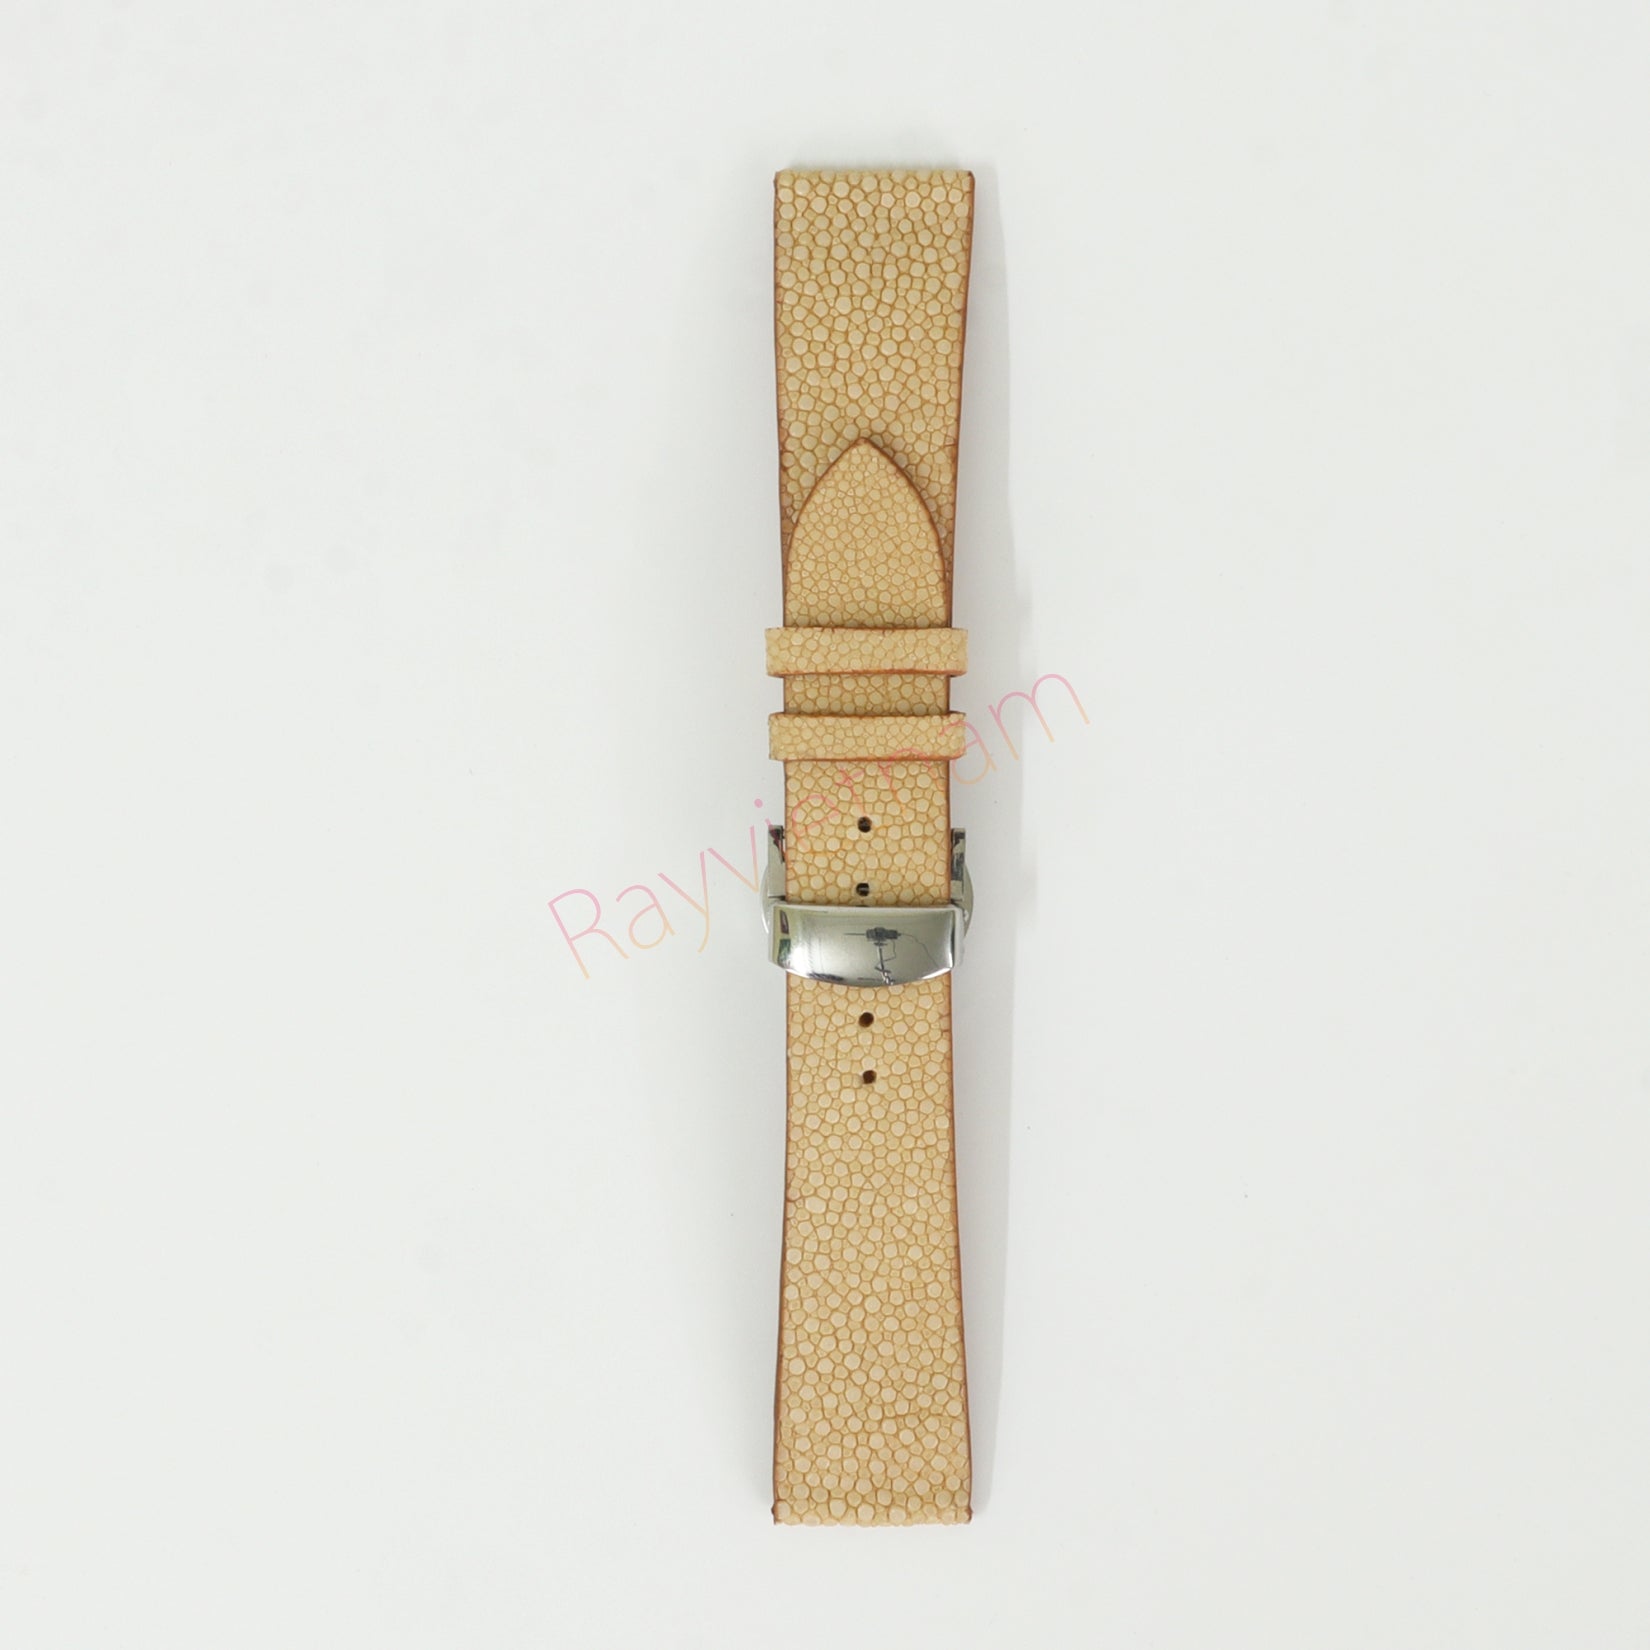 Genuine Stingray Leather Watch Straps With Deployant Clasp, Leather Watch Bands Quick Release Pins, Handmade Leather Watch Strap